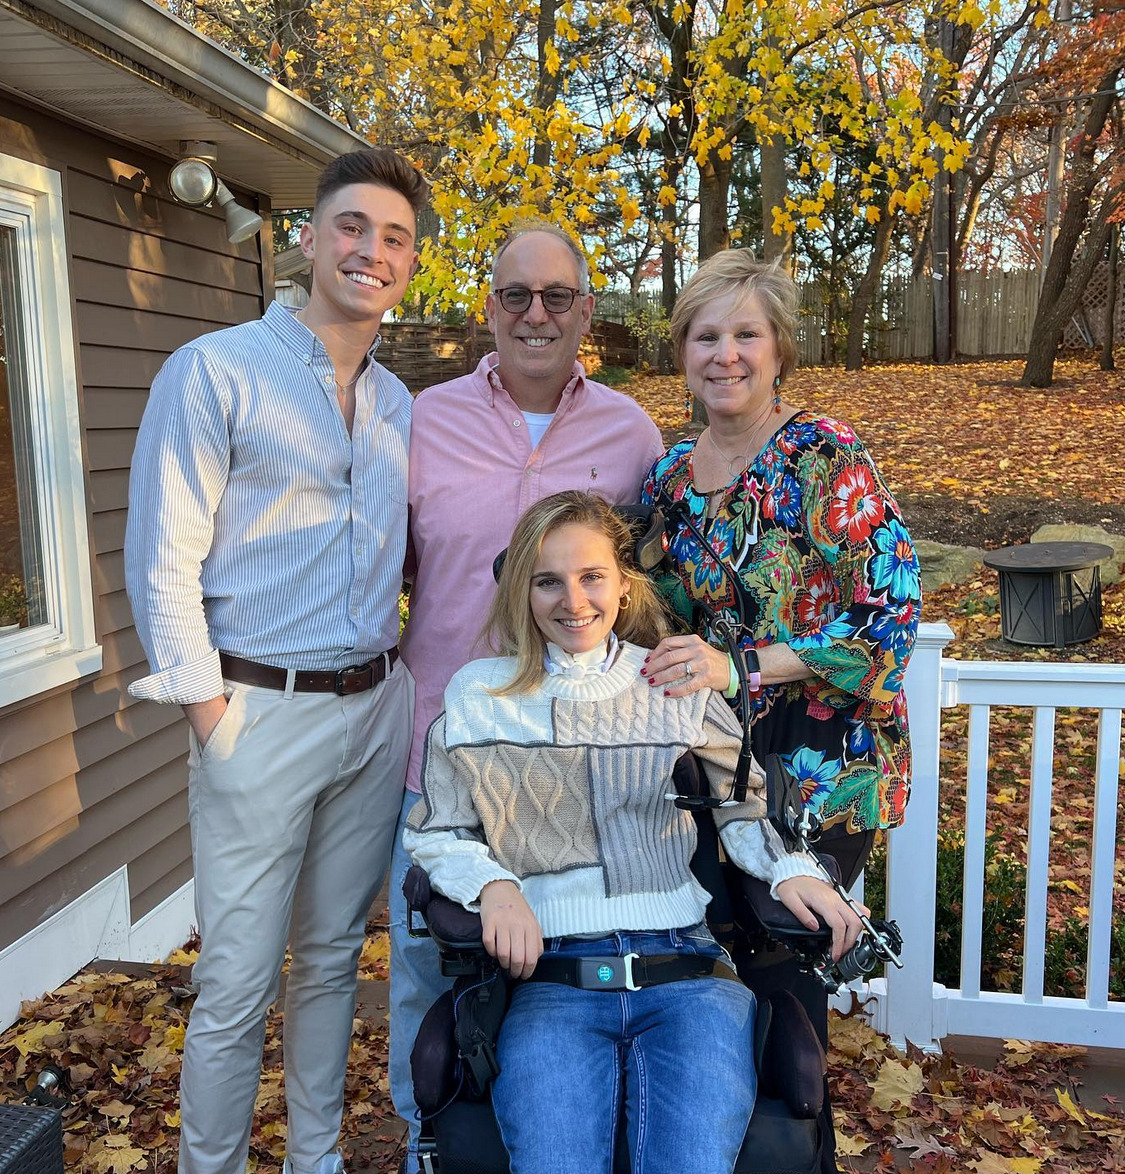 Rebecca with her family outdoors on a deck with fall leaves visible in the yard behind them. Seated in her black power chair, Rebecca has light skin, shoulder-length brown and blonde hair, a turtleneck graphic print tan and cream sweater, and jeans. Behind her stand her brother with light skin, a collared gray shirt, khaki pants and a belt with light skin and short brown hair. Her father, with short gray hair, sunglasses, and a pink button-up shirt. Her mom, with light skin, short sandy brown hair, and a vivid graphic print abstract flower long-sleeved shirt.